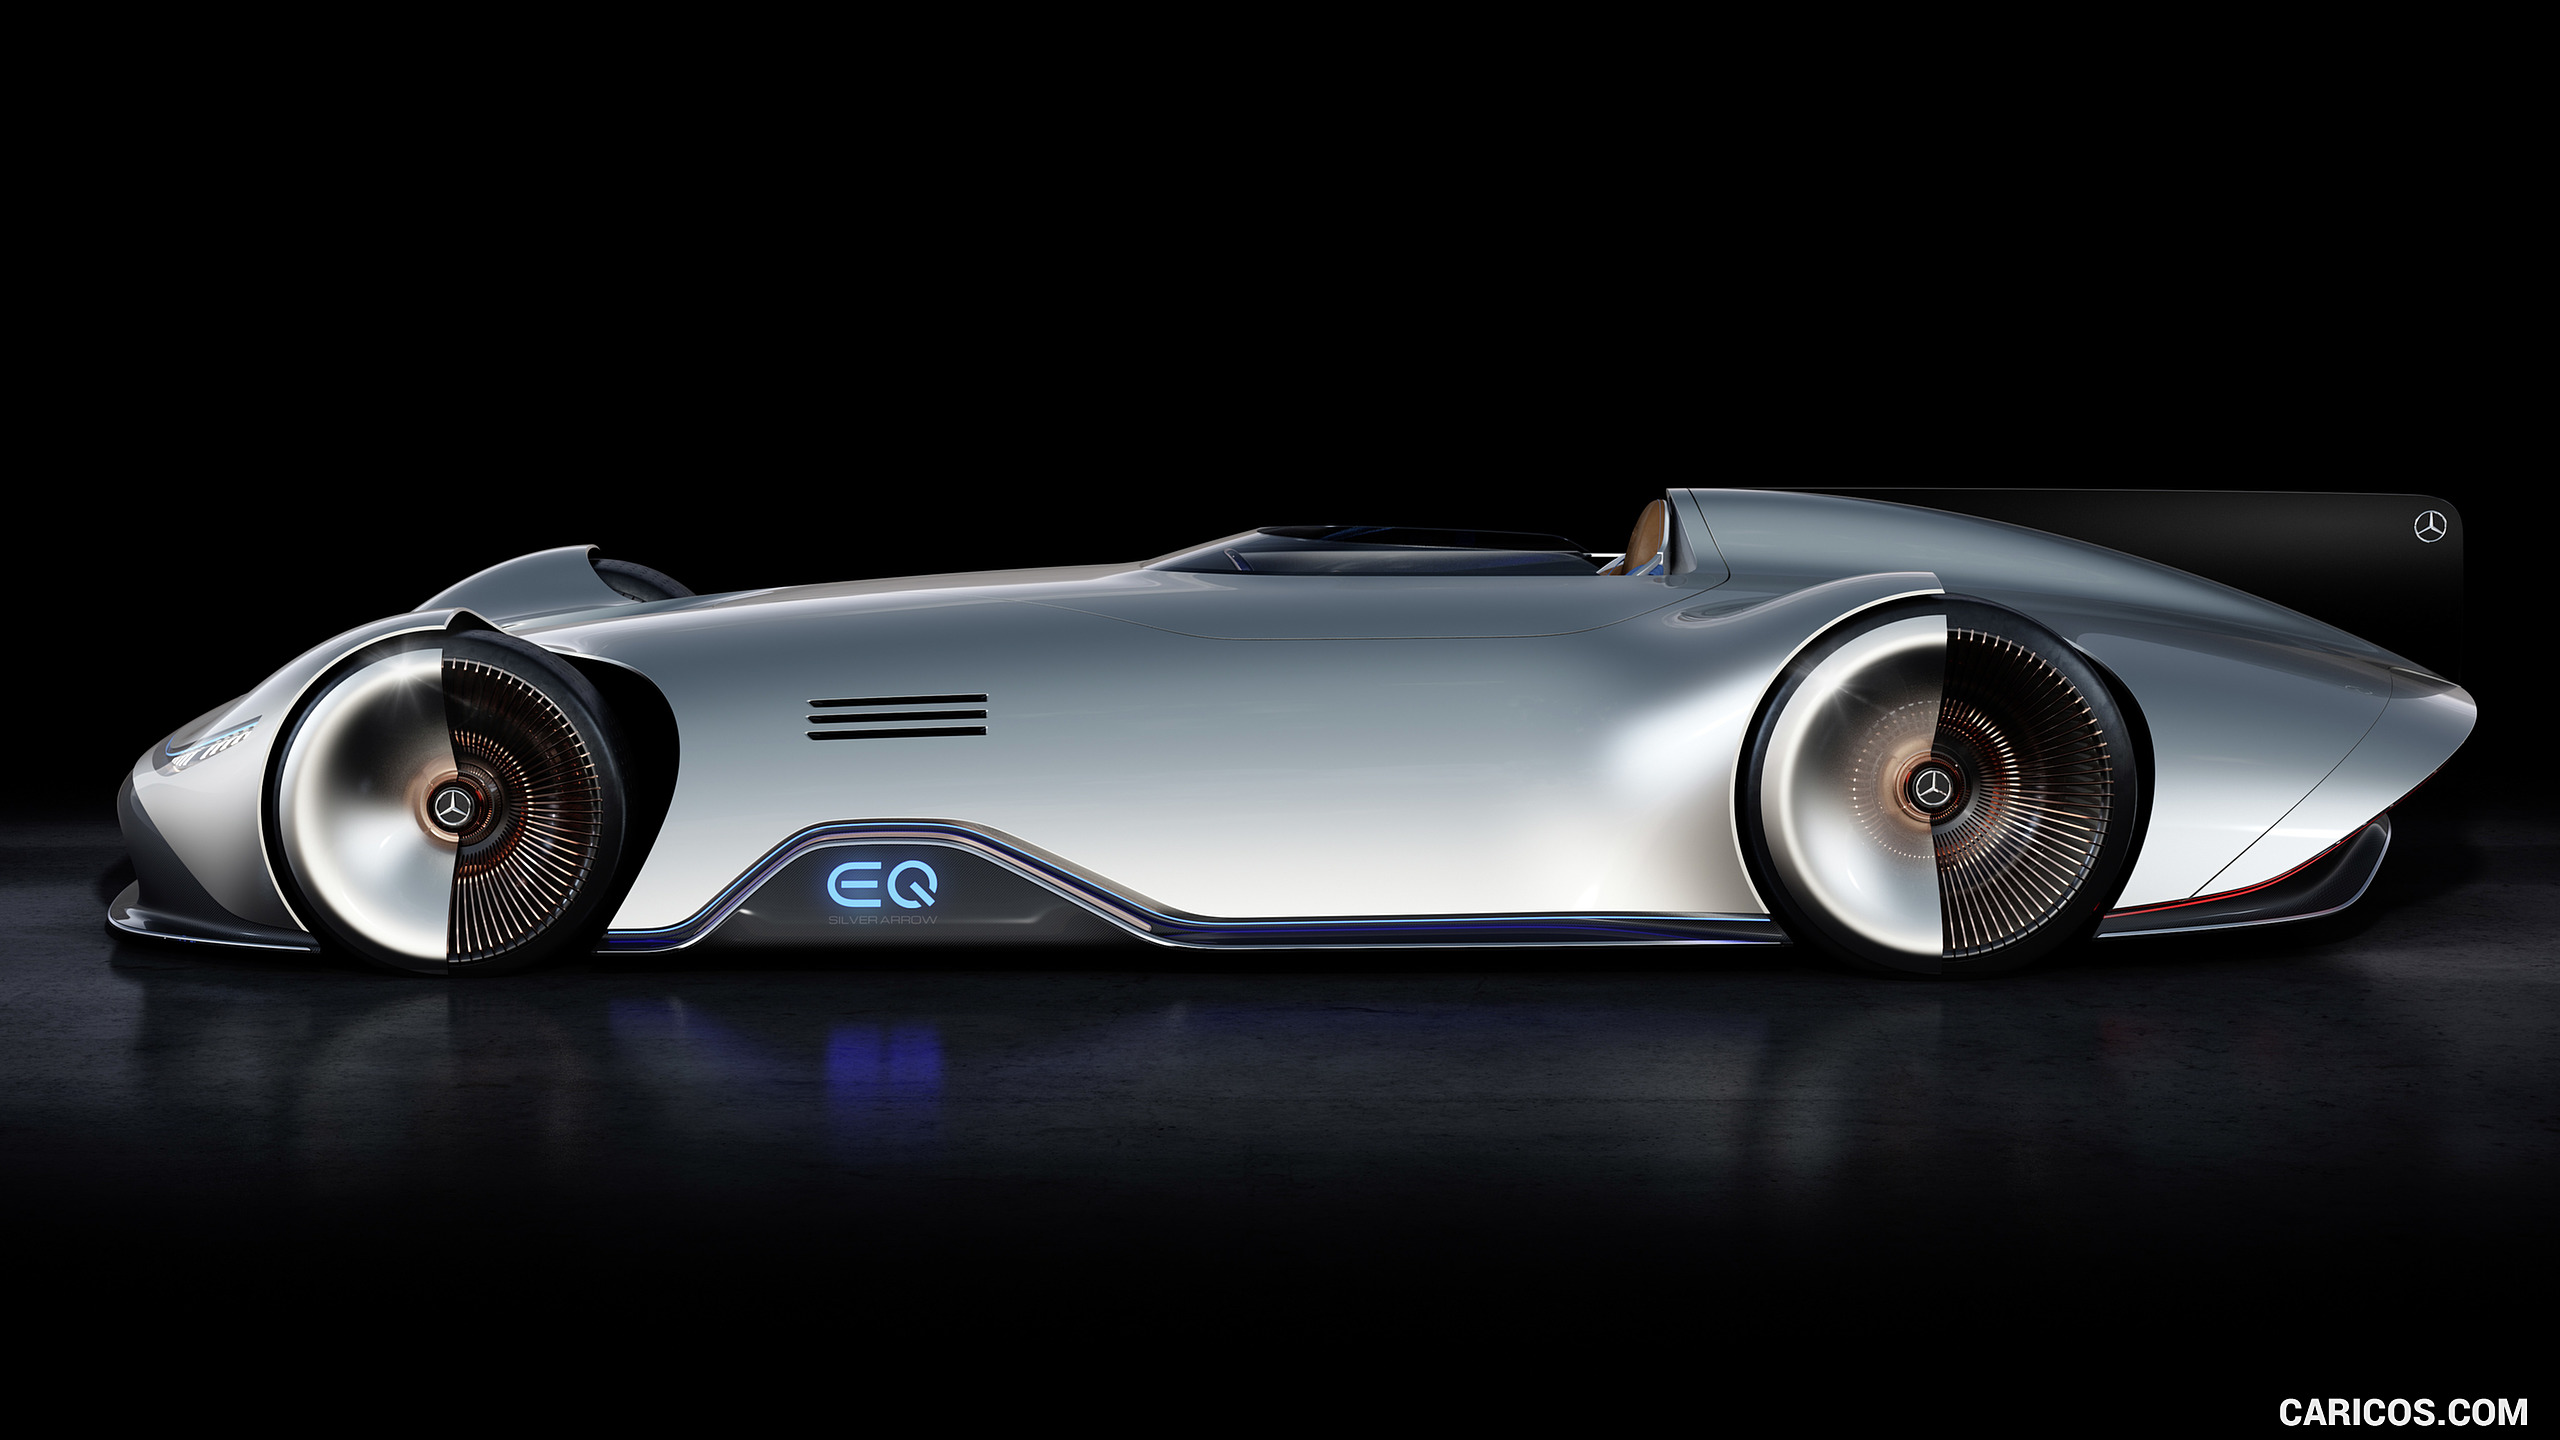 2018 Mercedes-Benz Vision EQ Silver Arrow Concept - Side, #33 of 50